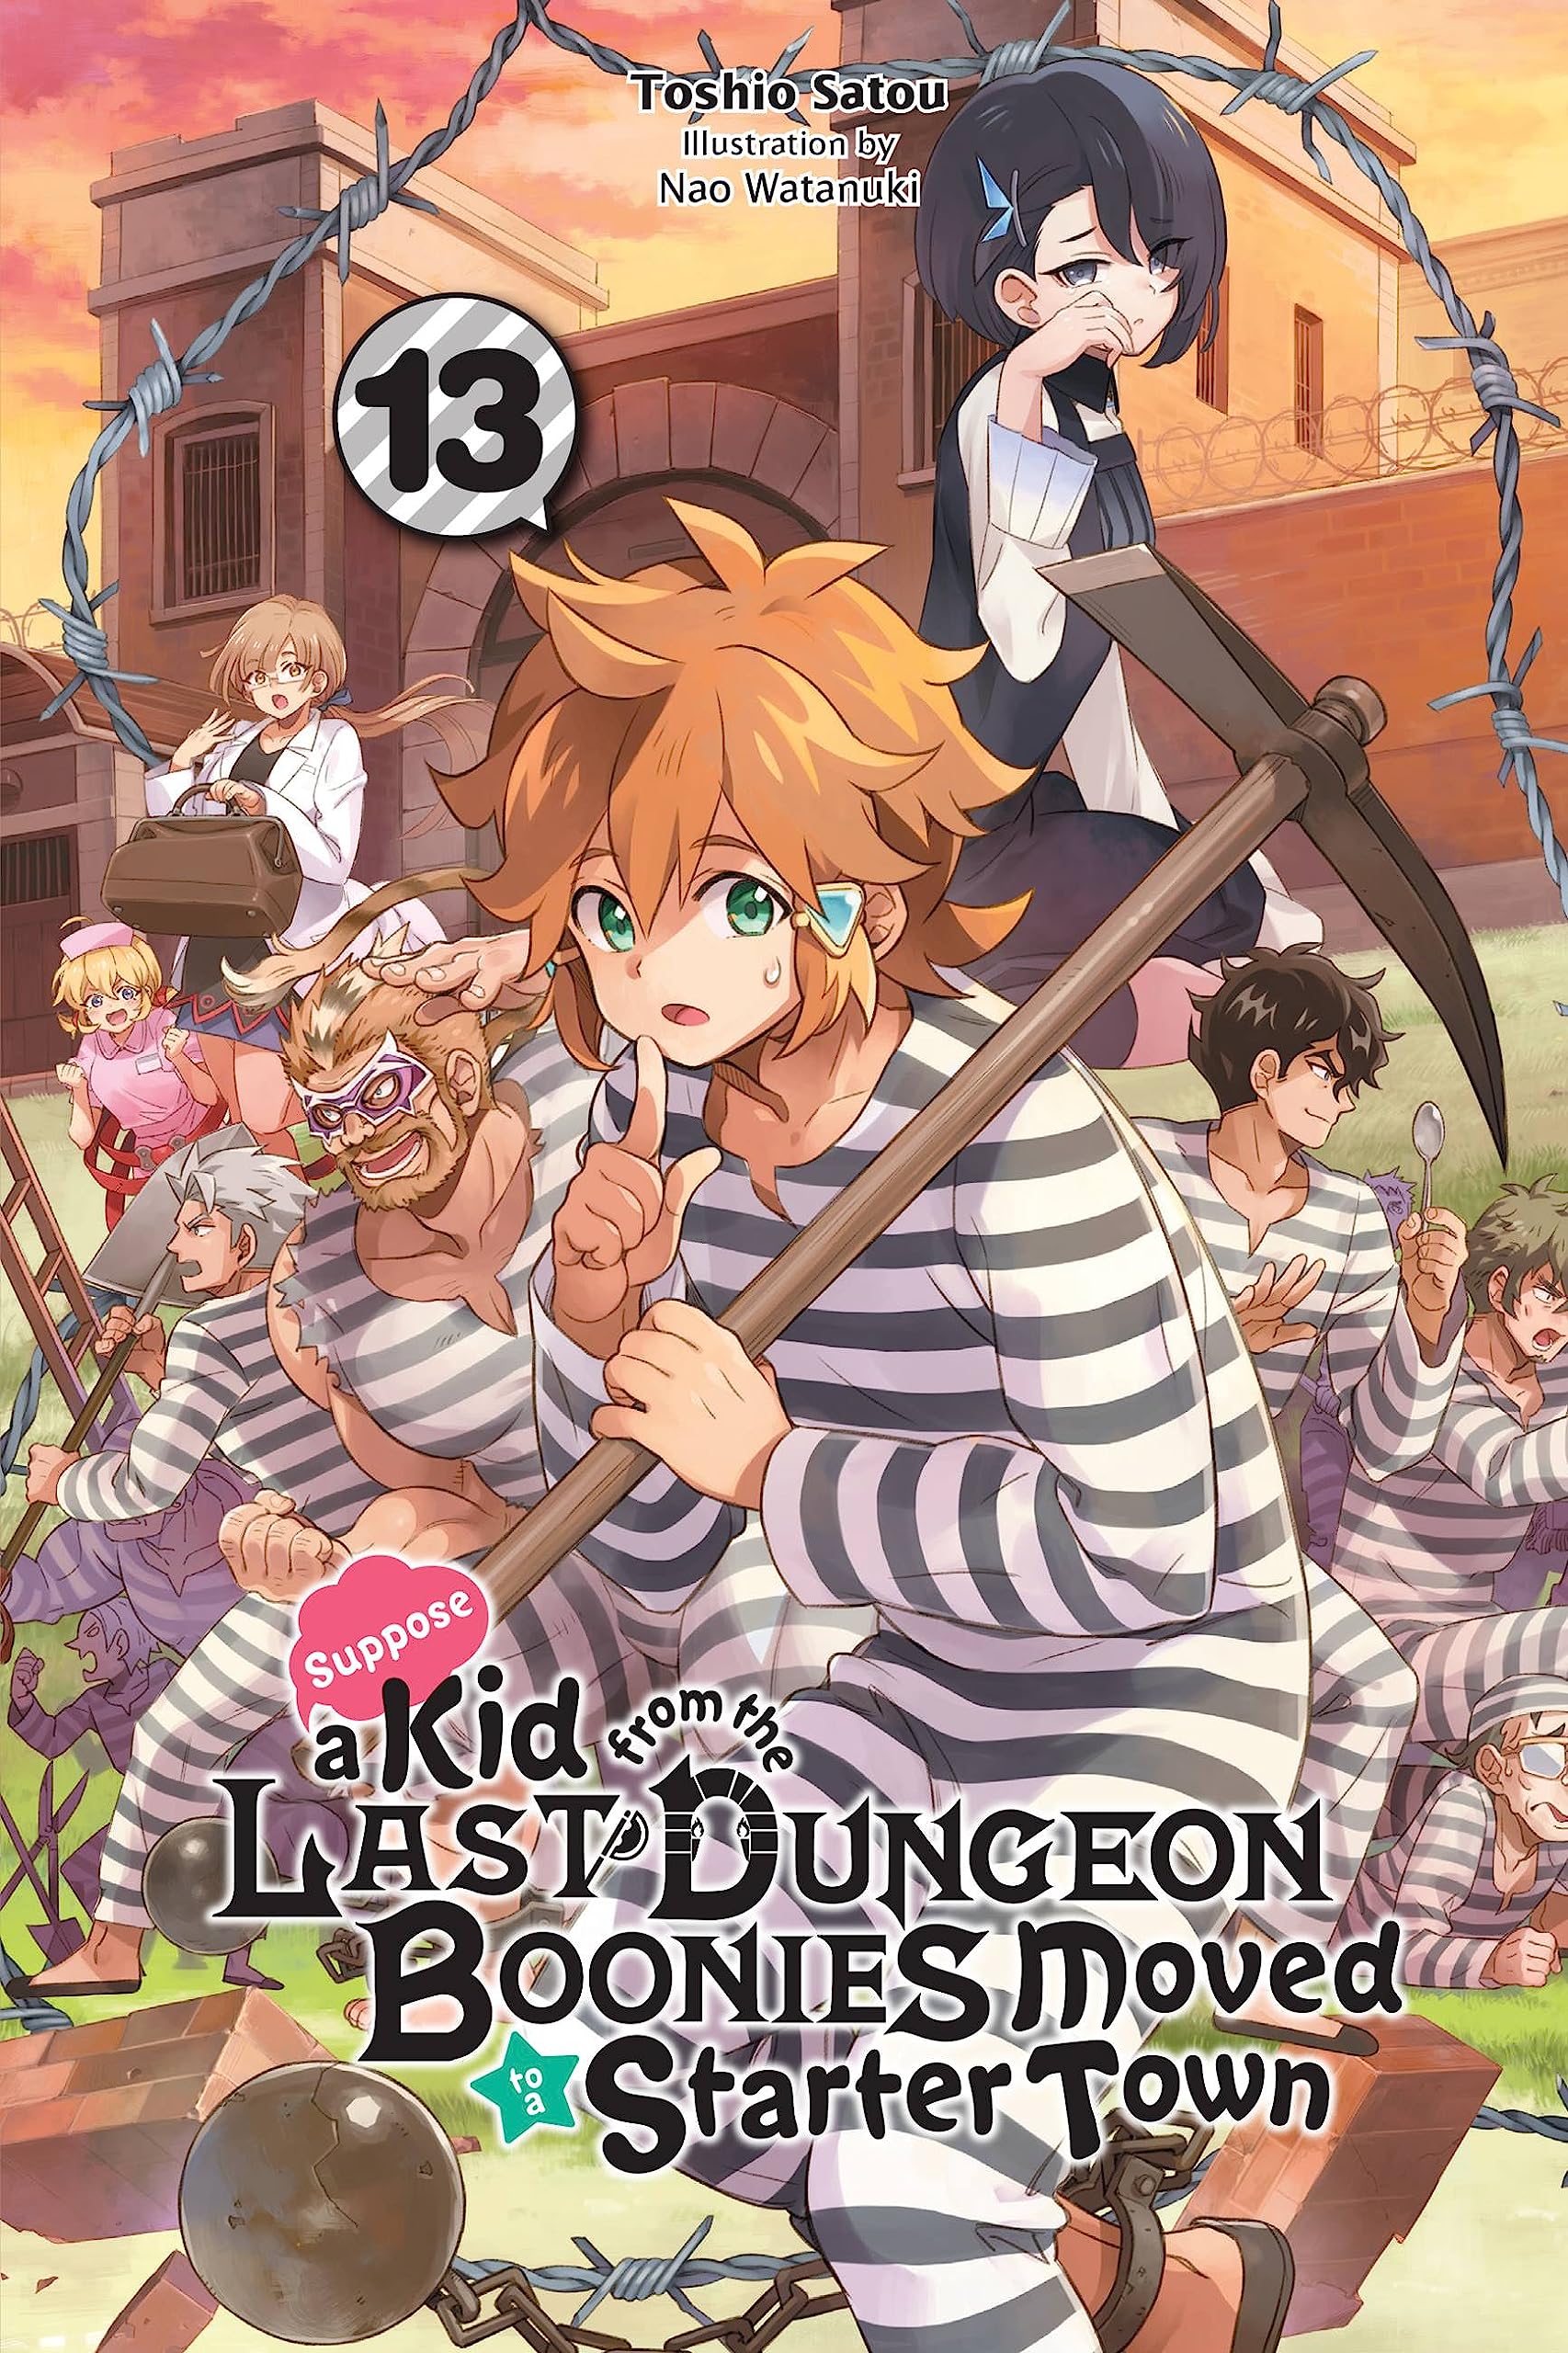 Suppose a Kid from the Last Dungeon Boonies Moved to a Starter Town Vol. 13 (Light Novel)